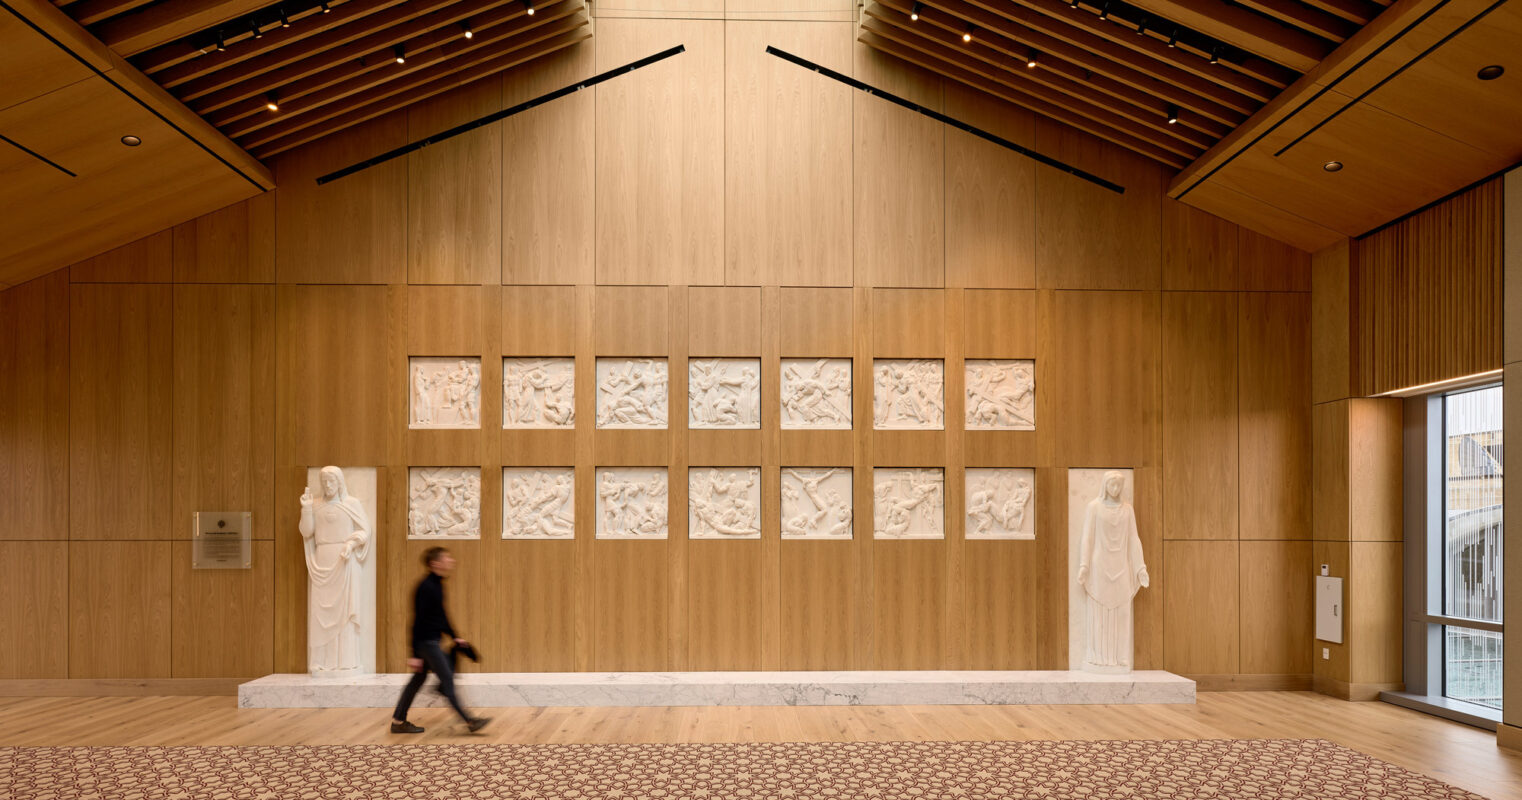 Modern gallery space boasting warm wooden panel walls and ceiling with geometric patterns, accentuated by ambient natural light filtering through a clerestory window. Elegant statues flank a series of framed artistic displays above a detailed patterned floor, with a person walking by, adding a dynamic element.